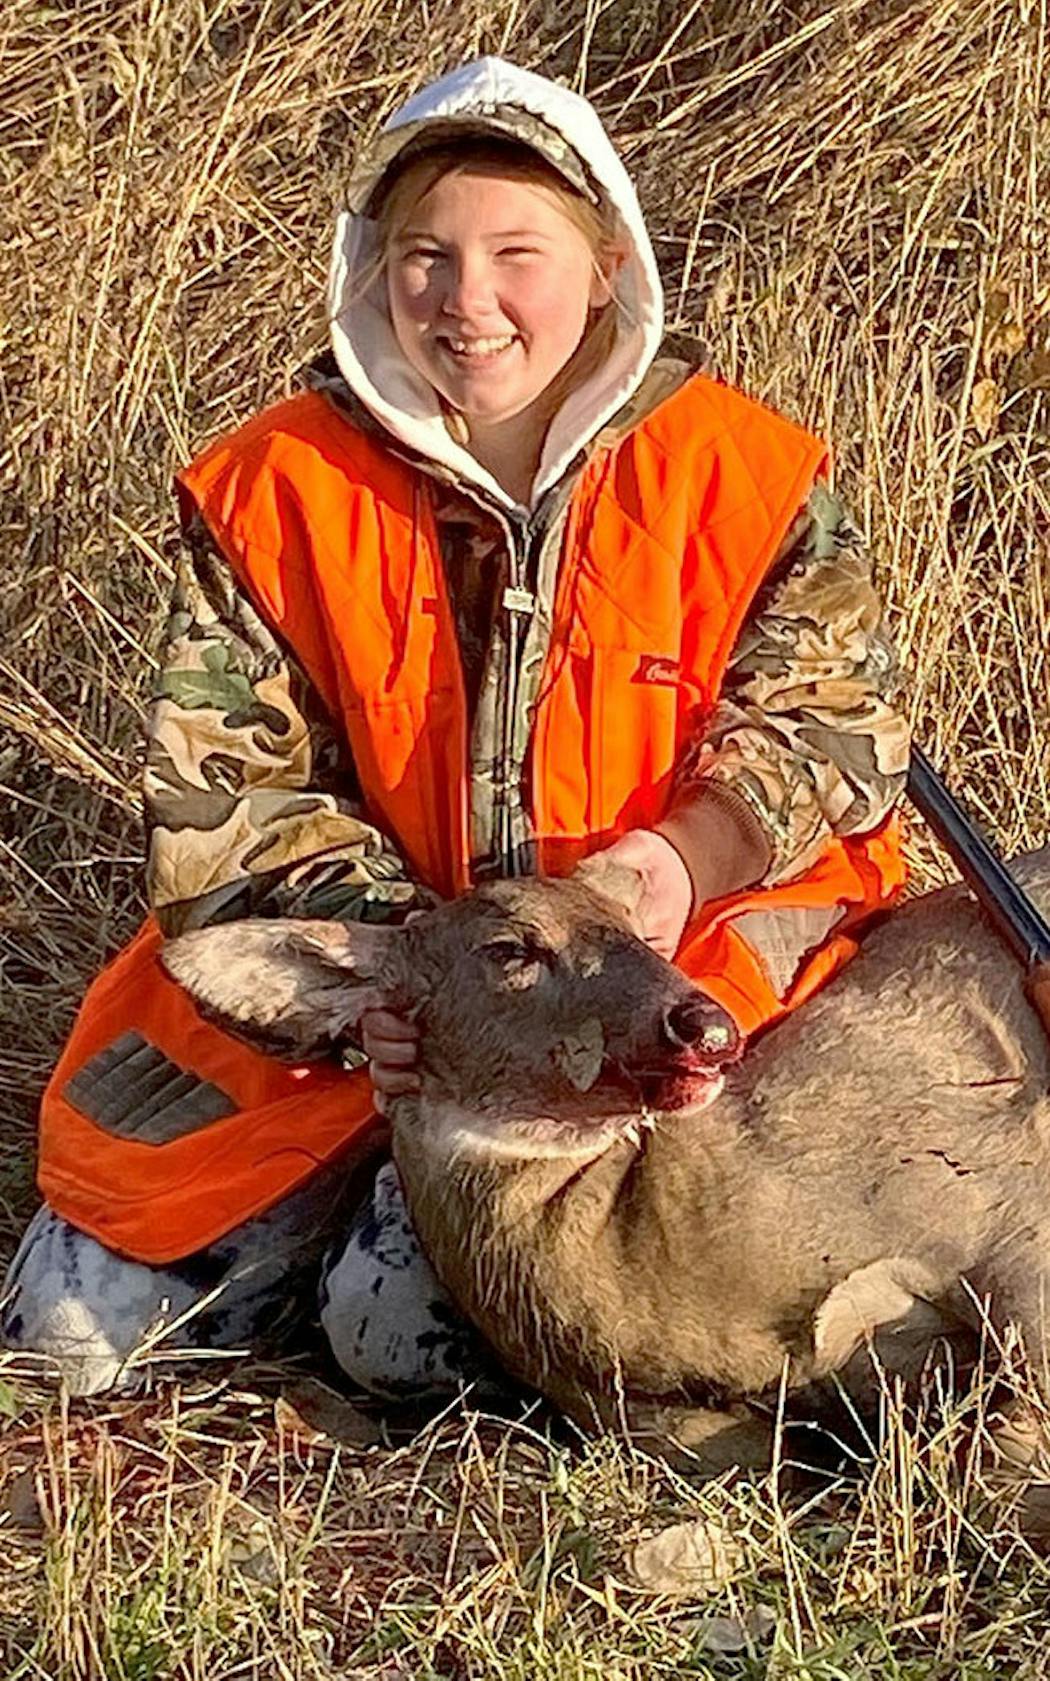 Kylee Kaderabek, 12, from Lakefield, Minn., was in her grandpa’s deer blind 5 miles south of town with her dad, Rustin. This doe surprised them by walking right beside the blind, stopping just 20 yards away to give Kylee a clean shot with her slug gun.